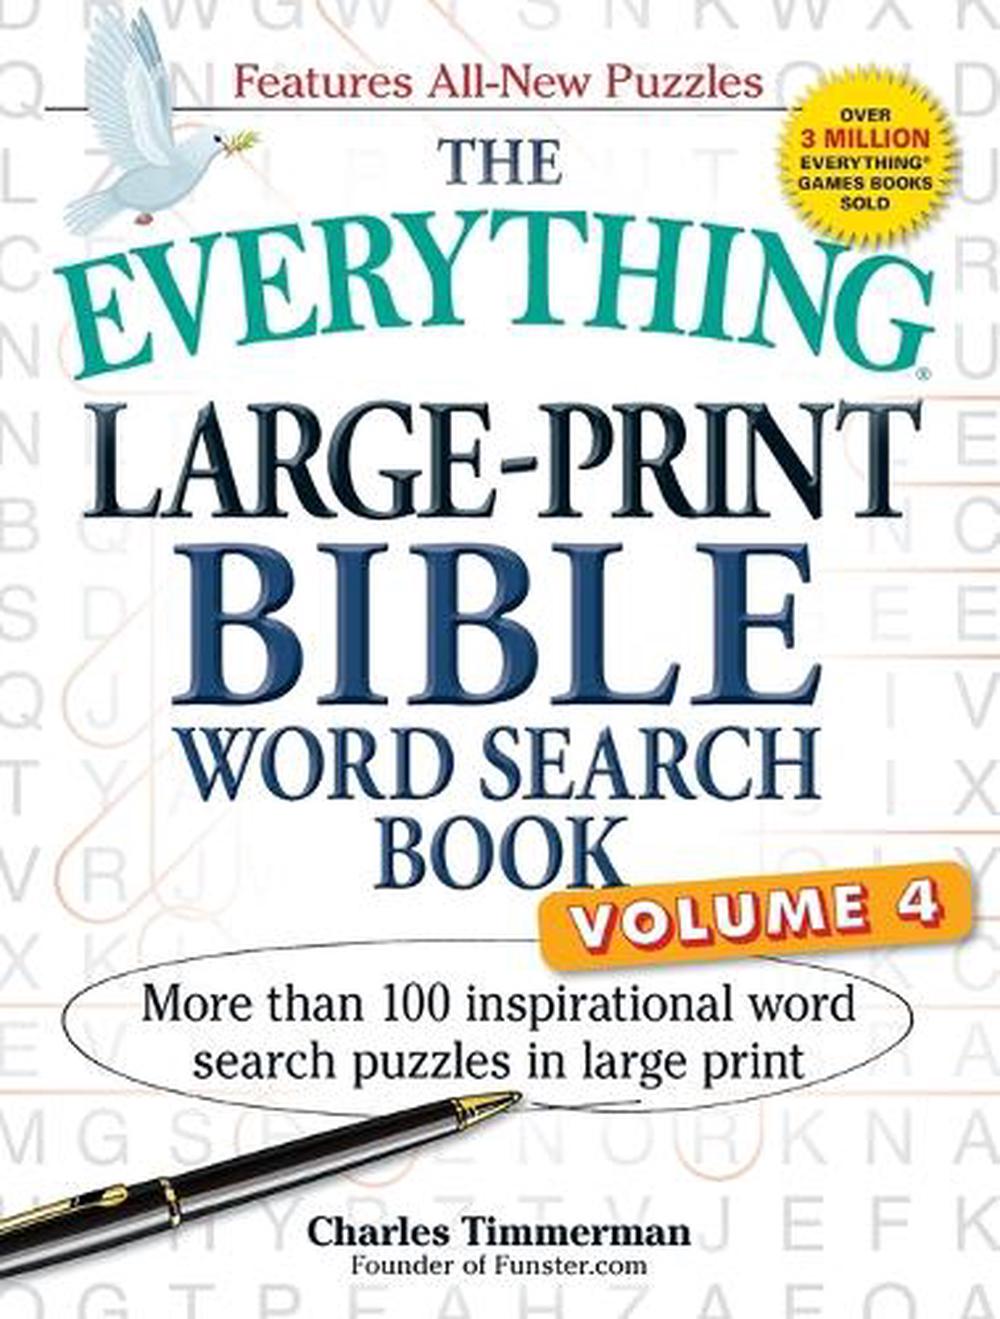 The Everything Large Print Bible Word Search Book Volume 4 More Than 100 Inspirational Word Search Puzzles In Large Print By Charles Timmerman Paperback Buy Online At Moby The Great